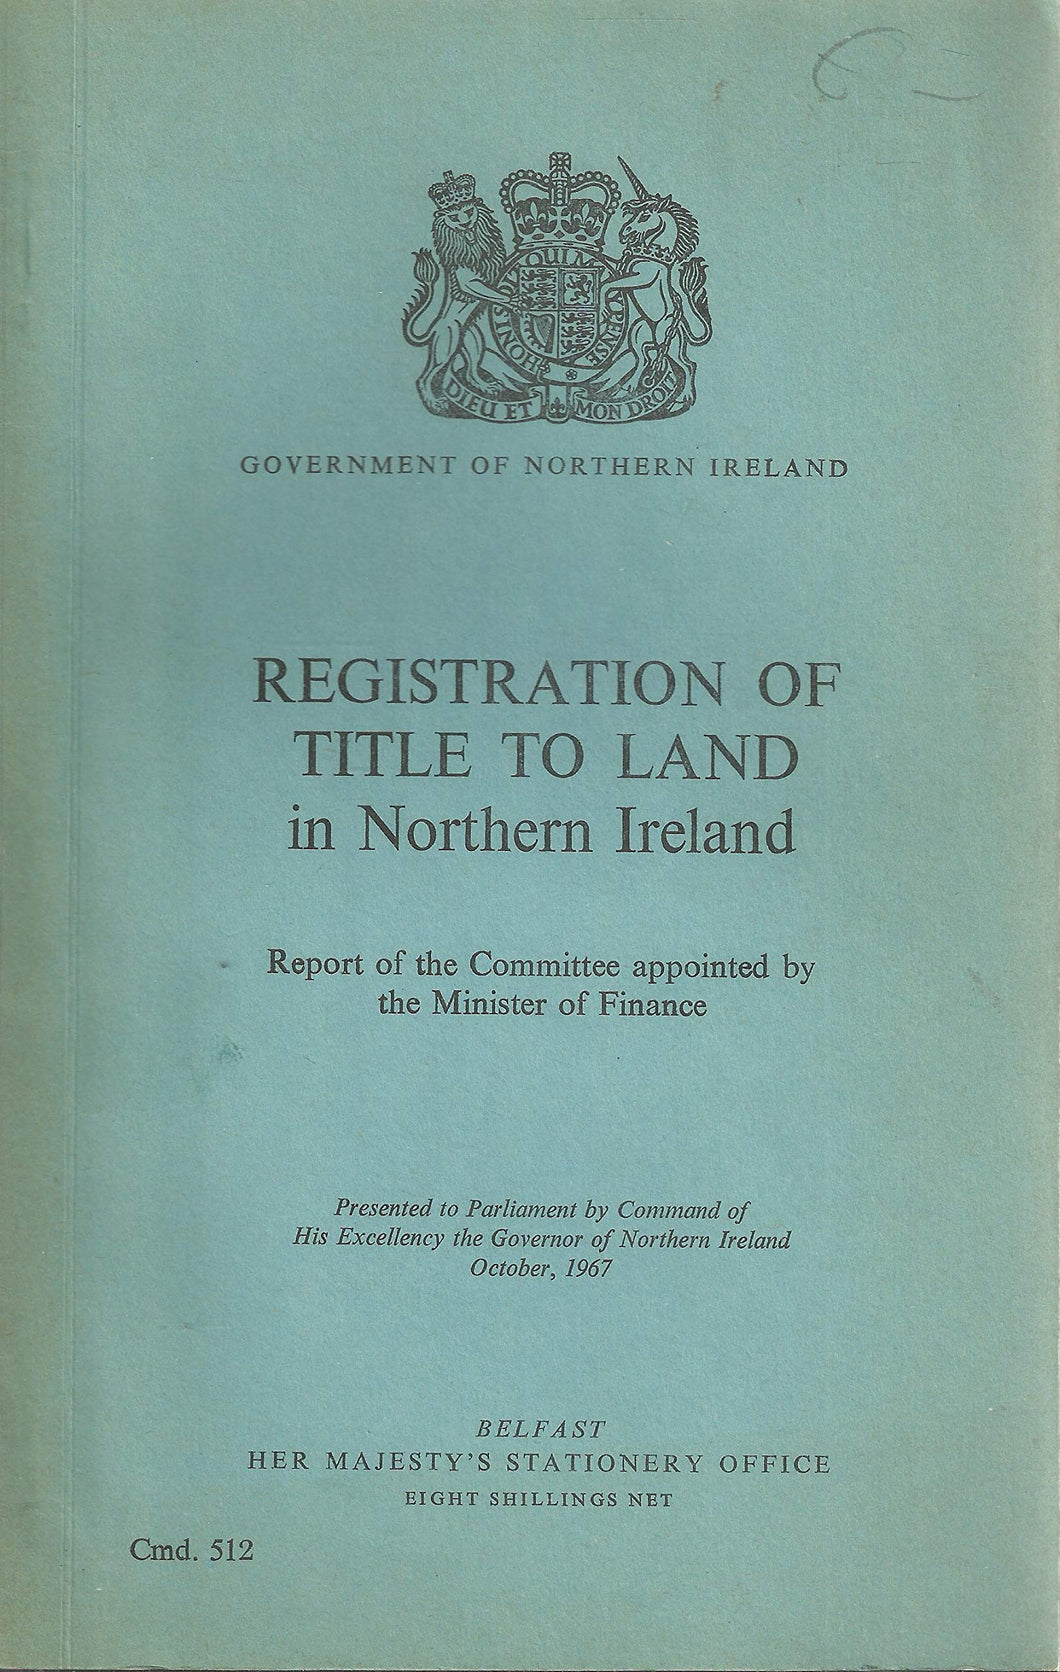 Registration of Title to Land in Northern Ireland - Report of the Committee Appointed by the Minister of Finance - Government of Northern Ireland